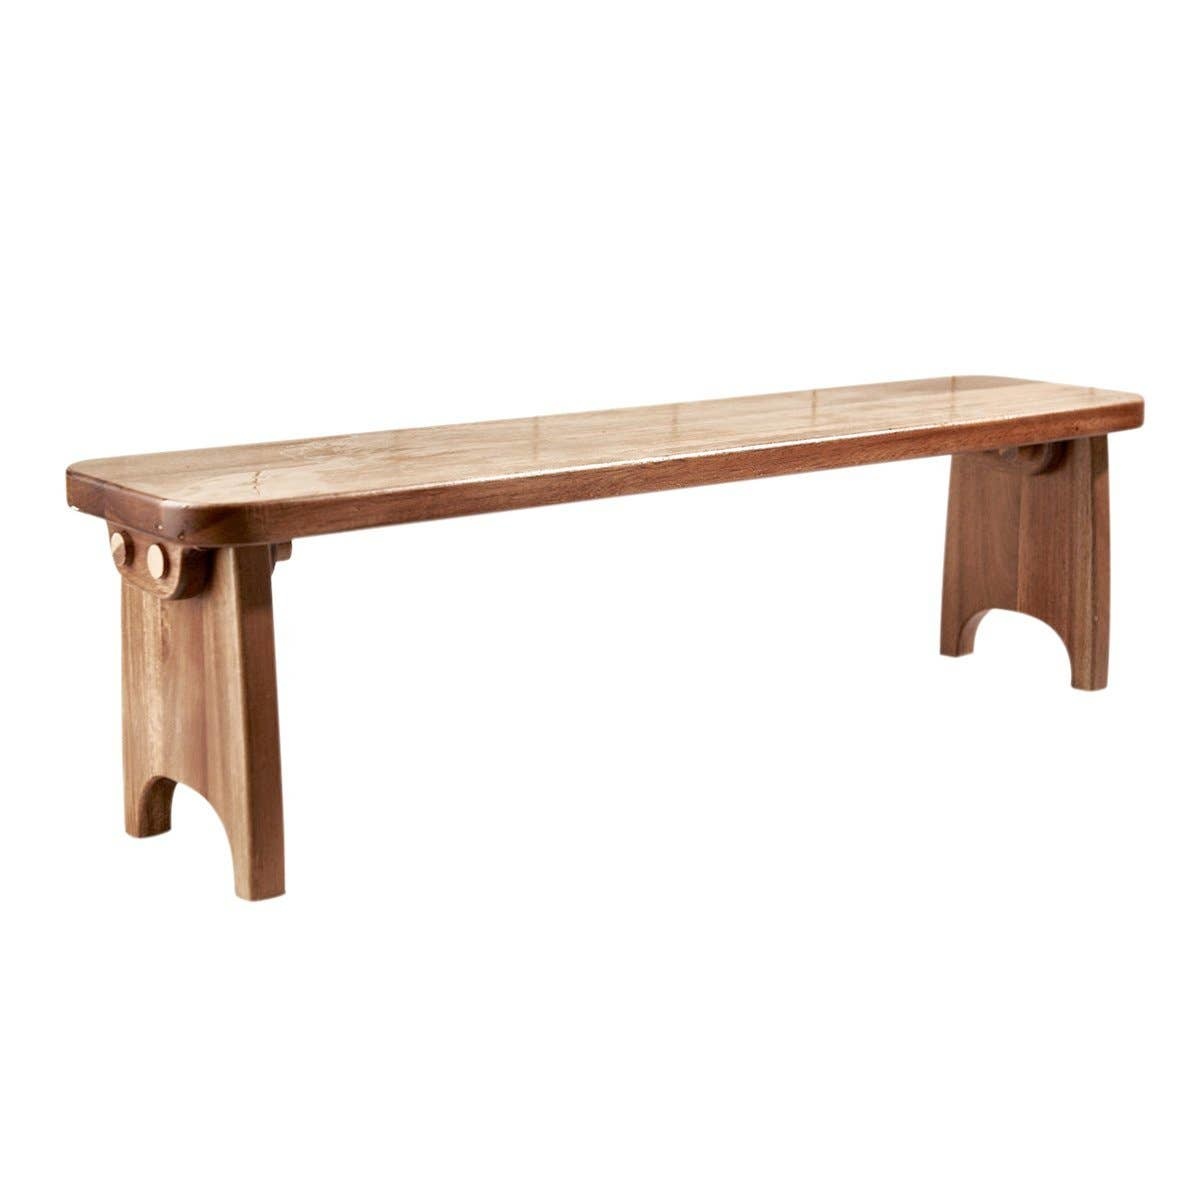 Elevated Timber Serving Board, Available for local pick up